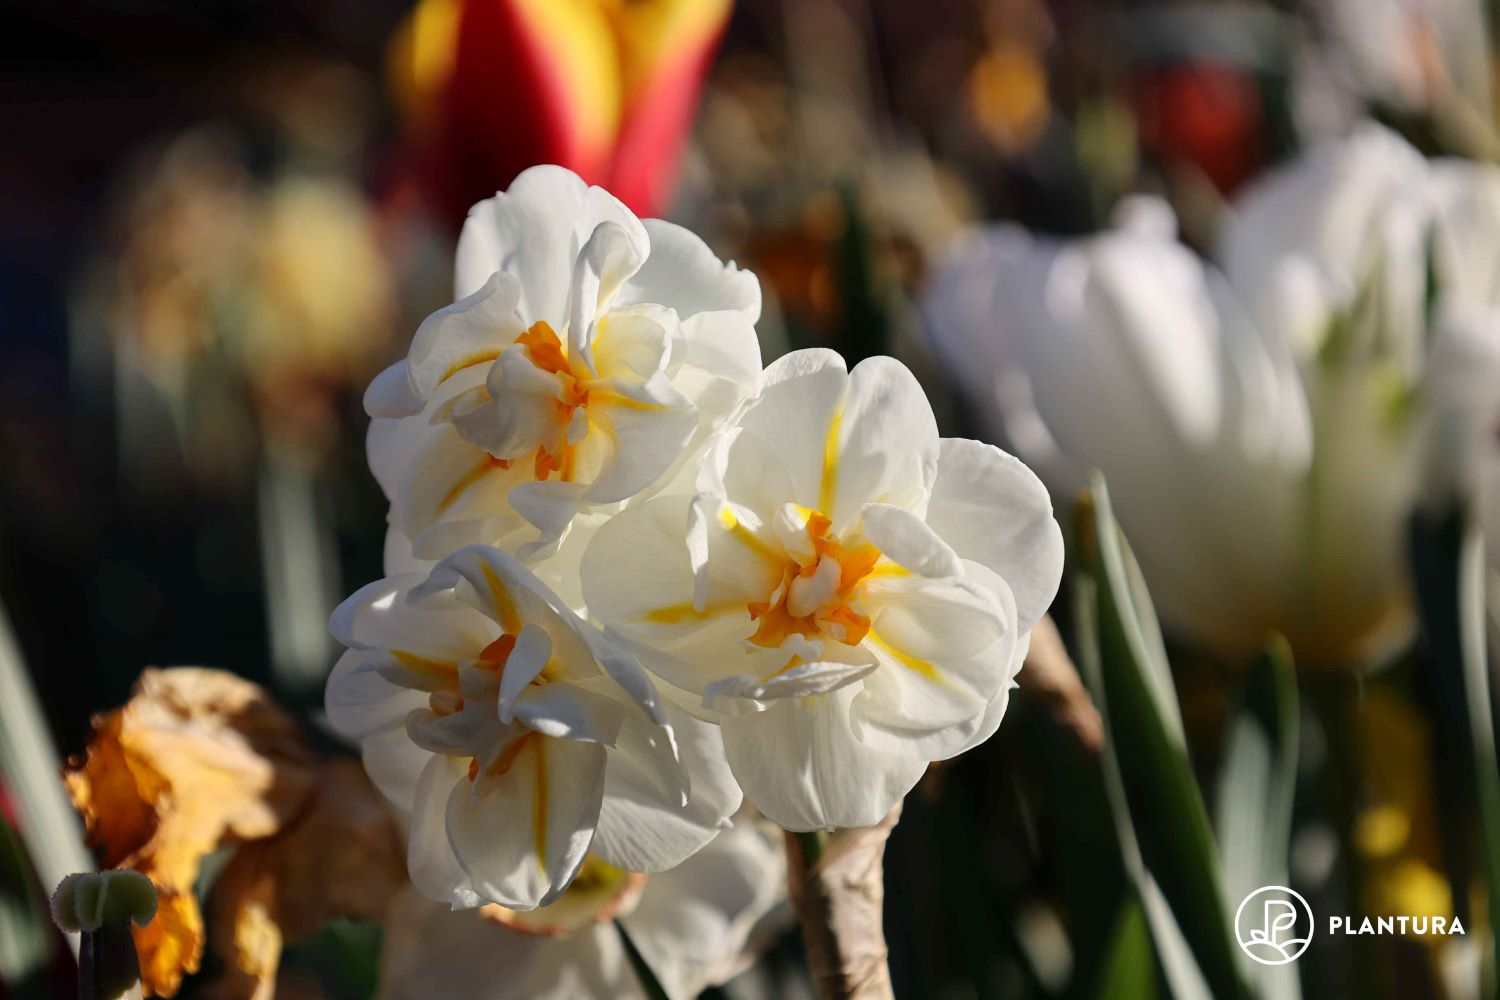 White double flowered daffodil